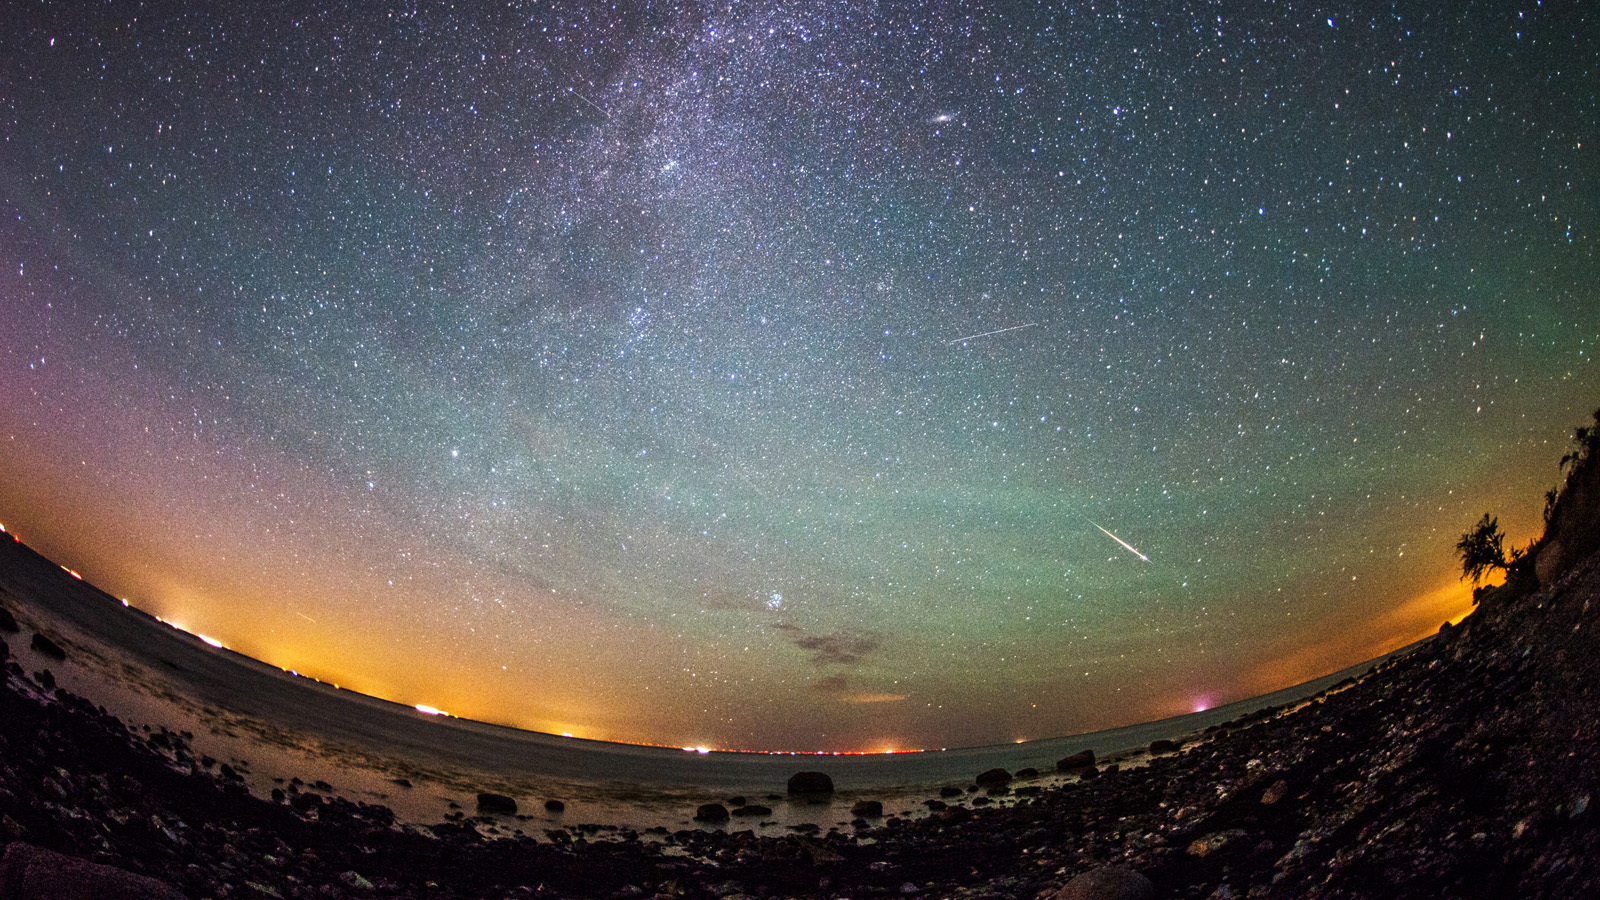 The Perseid meteor shower can be seen in the Finnish sky